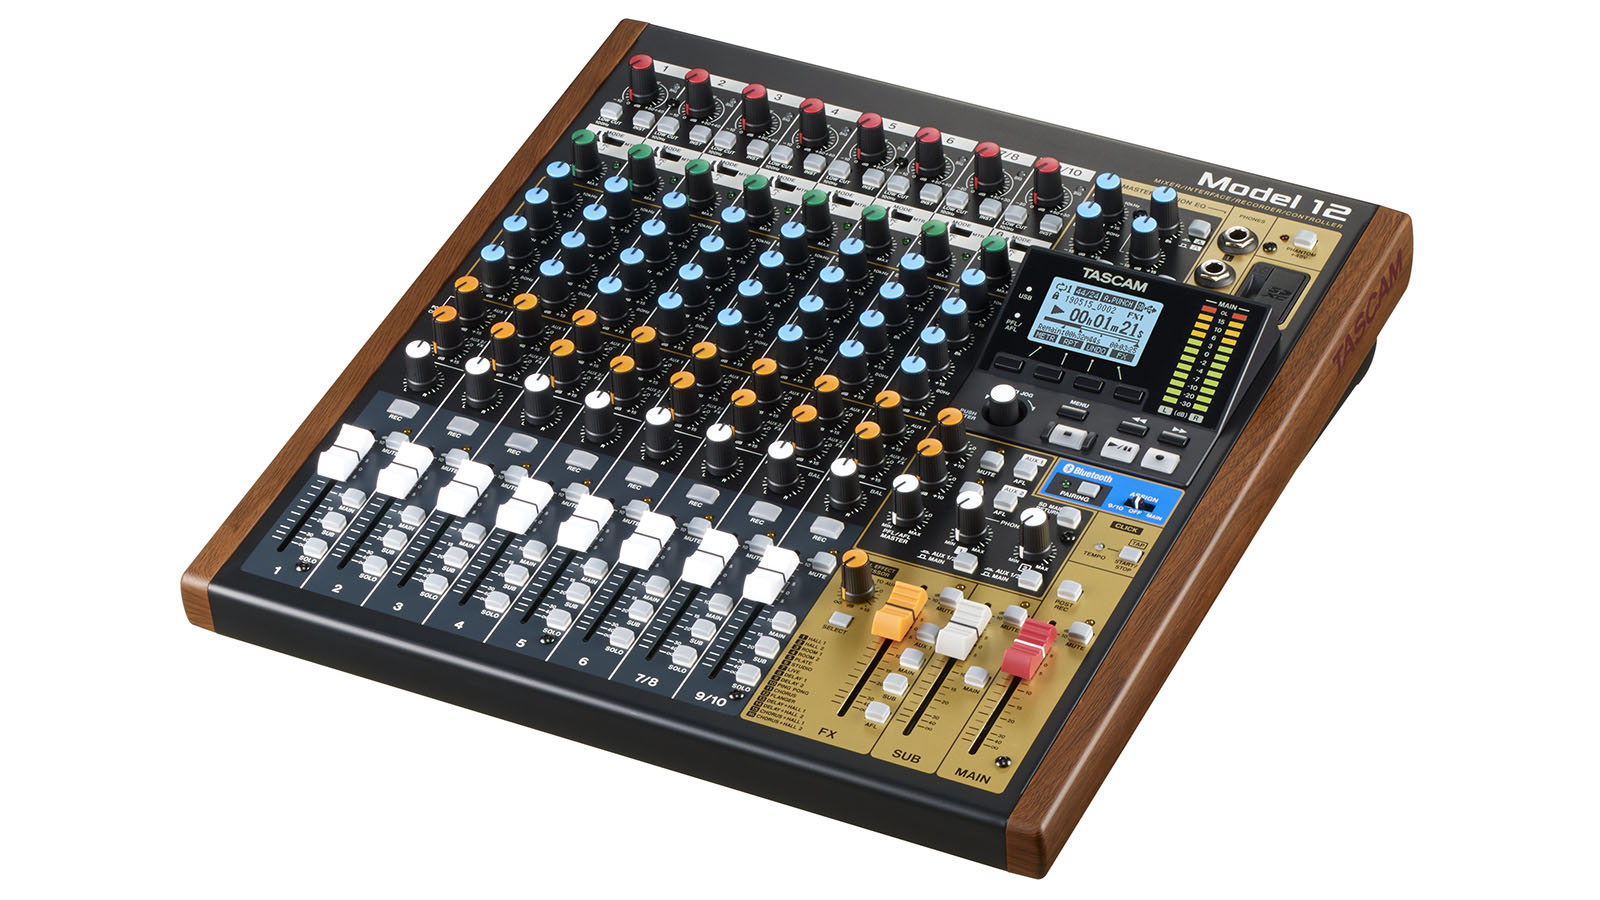 NAMM 2020: Tascam’s Model 12 is a multitrack mixer and recorder at a keen price point